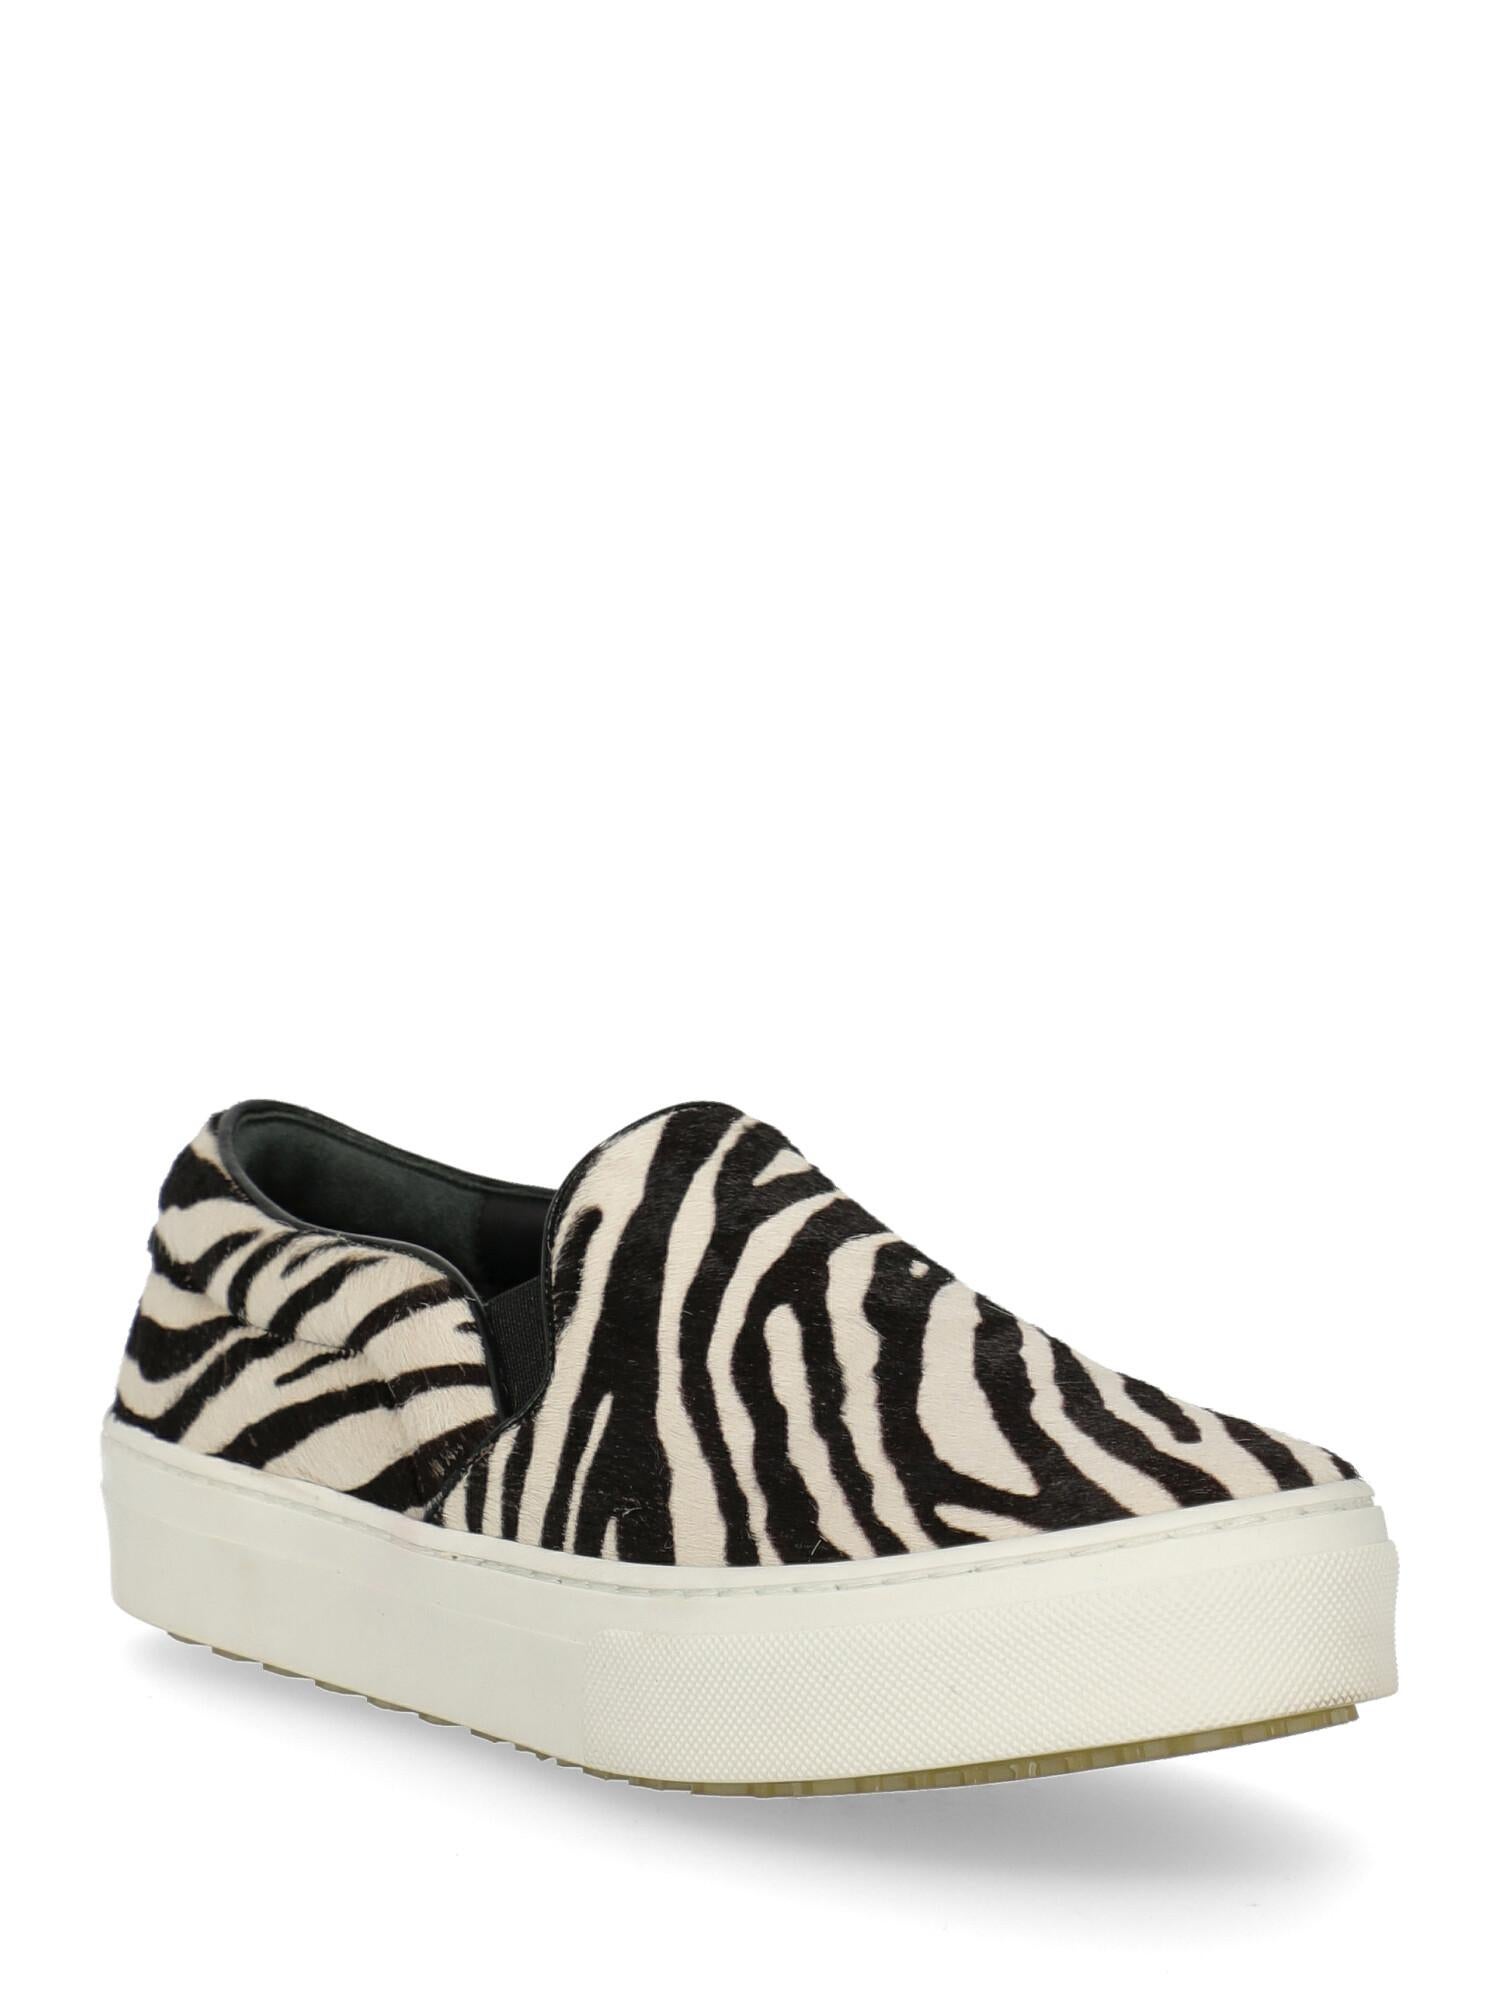 Sneaker, leather, animal print, slip-on style, lining with logo, pony, branded insole, contrasting sole, leather lining. Product Condition: Excellent. Sole: negligible signs of use
